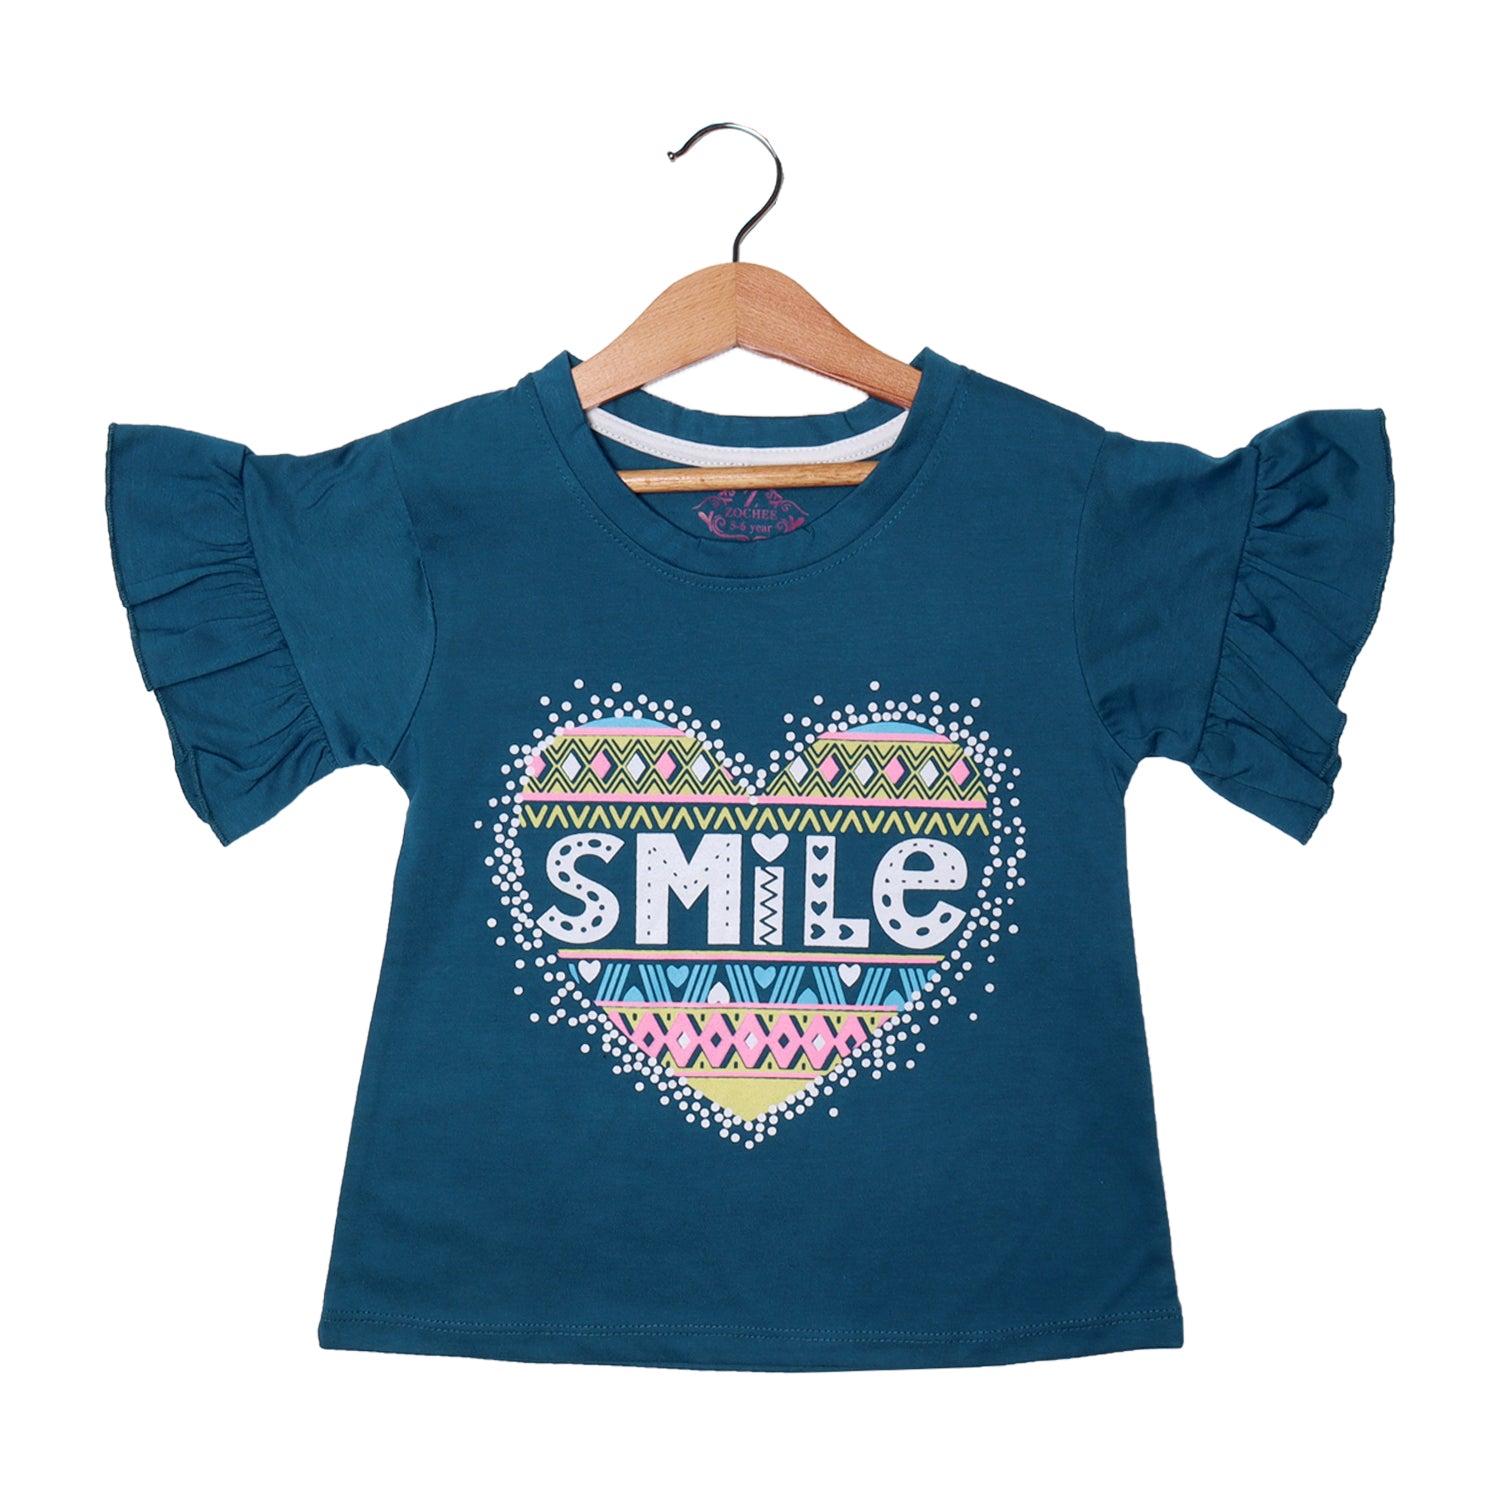 TEAL BLUE HEART SMILE PRINTED T-SHIRT FOR GIRLS